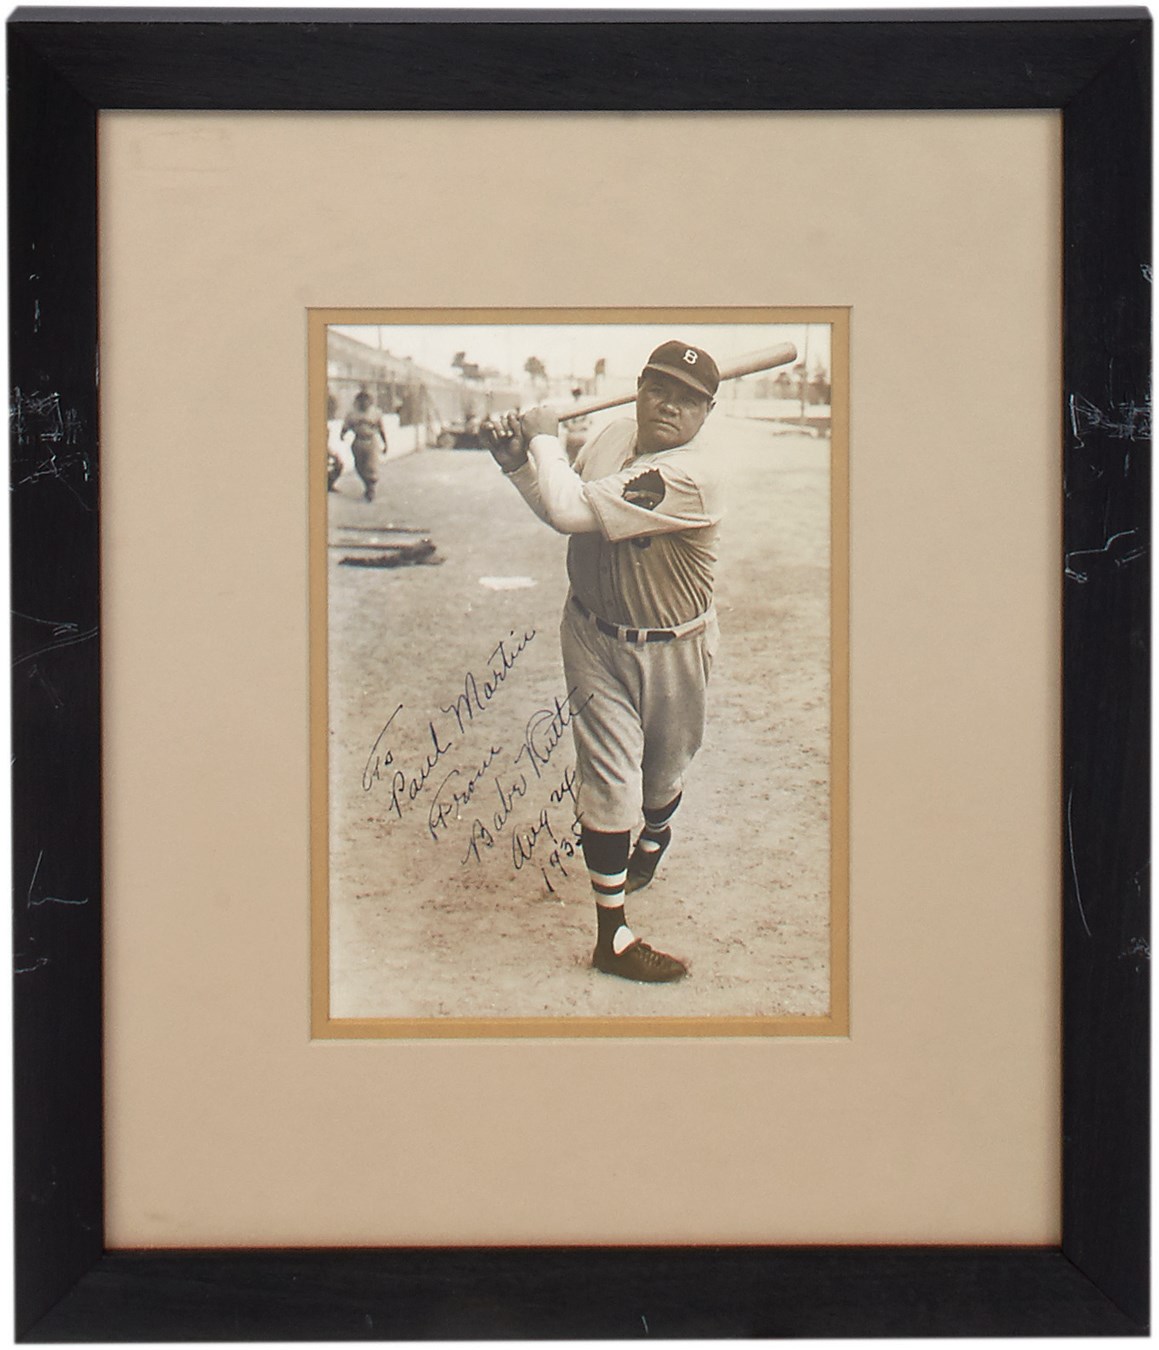 Ruth and Gehrig - Magnificent 1935 Babe Ruth Signed Boston Braves Photograph